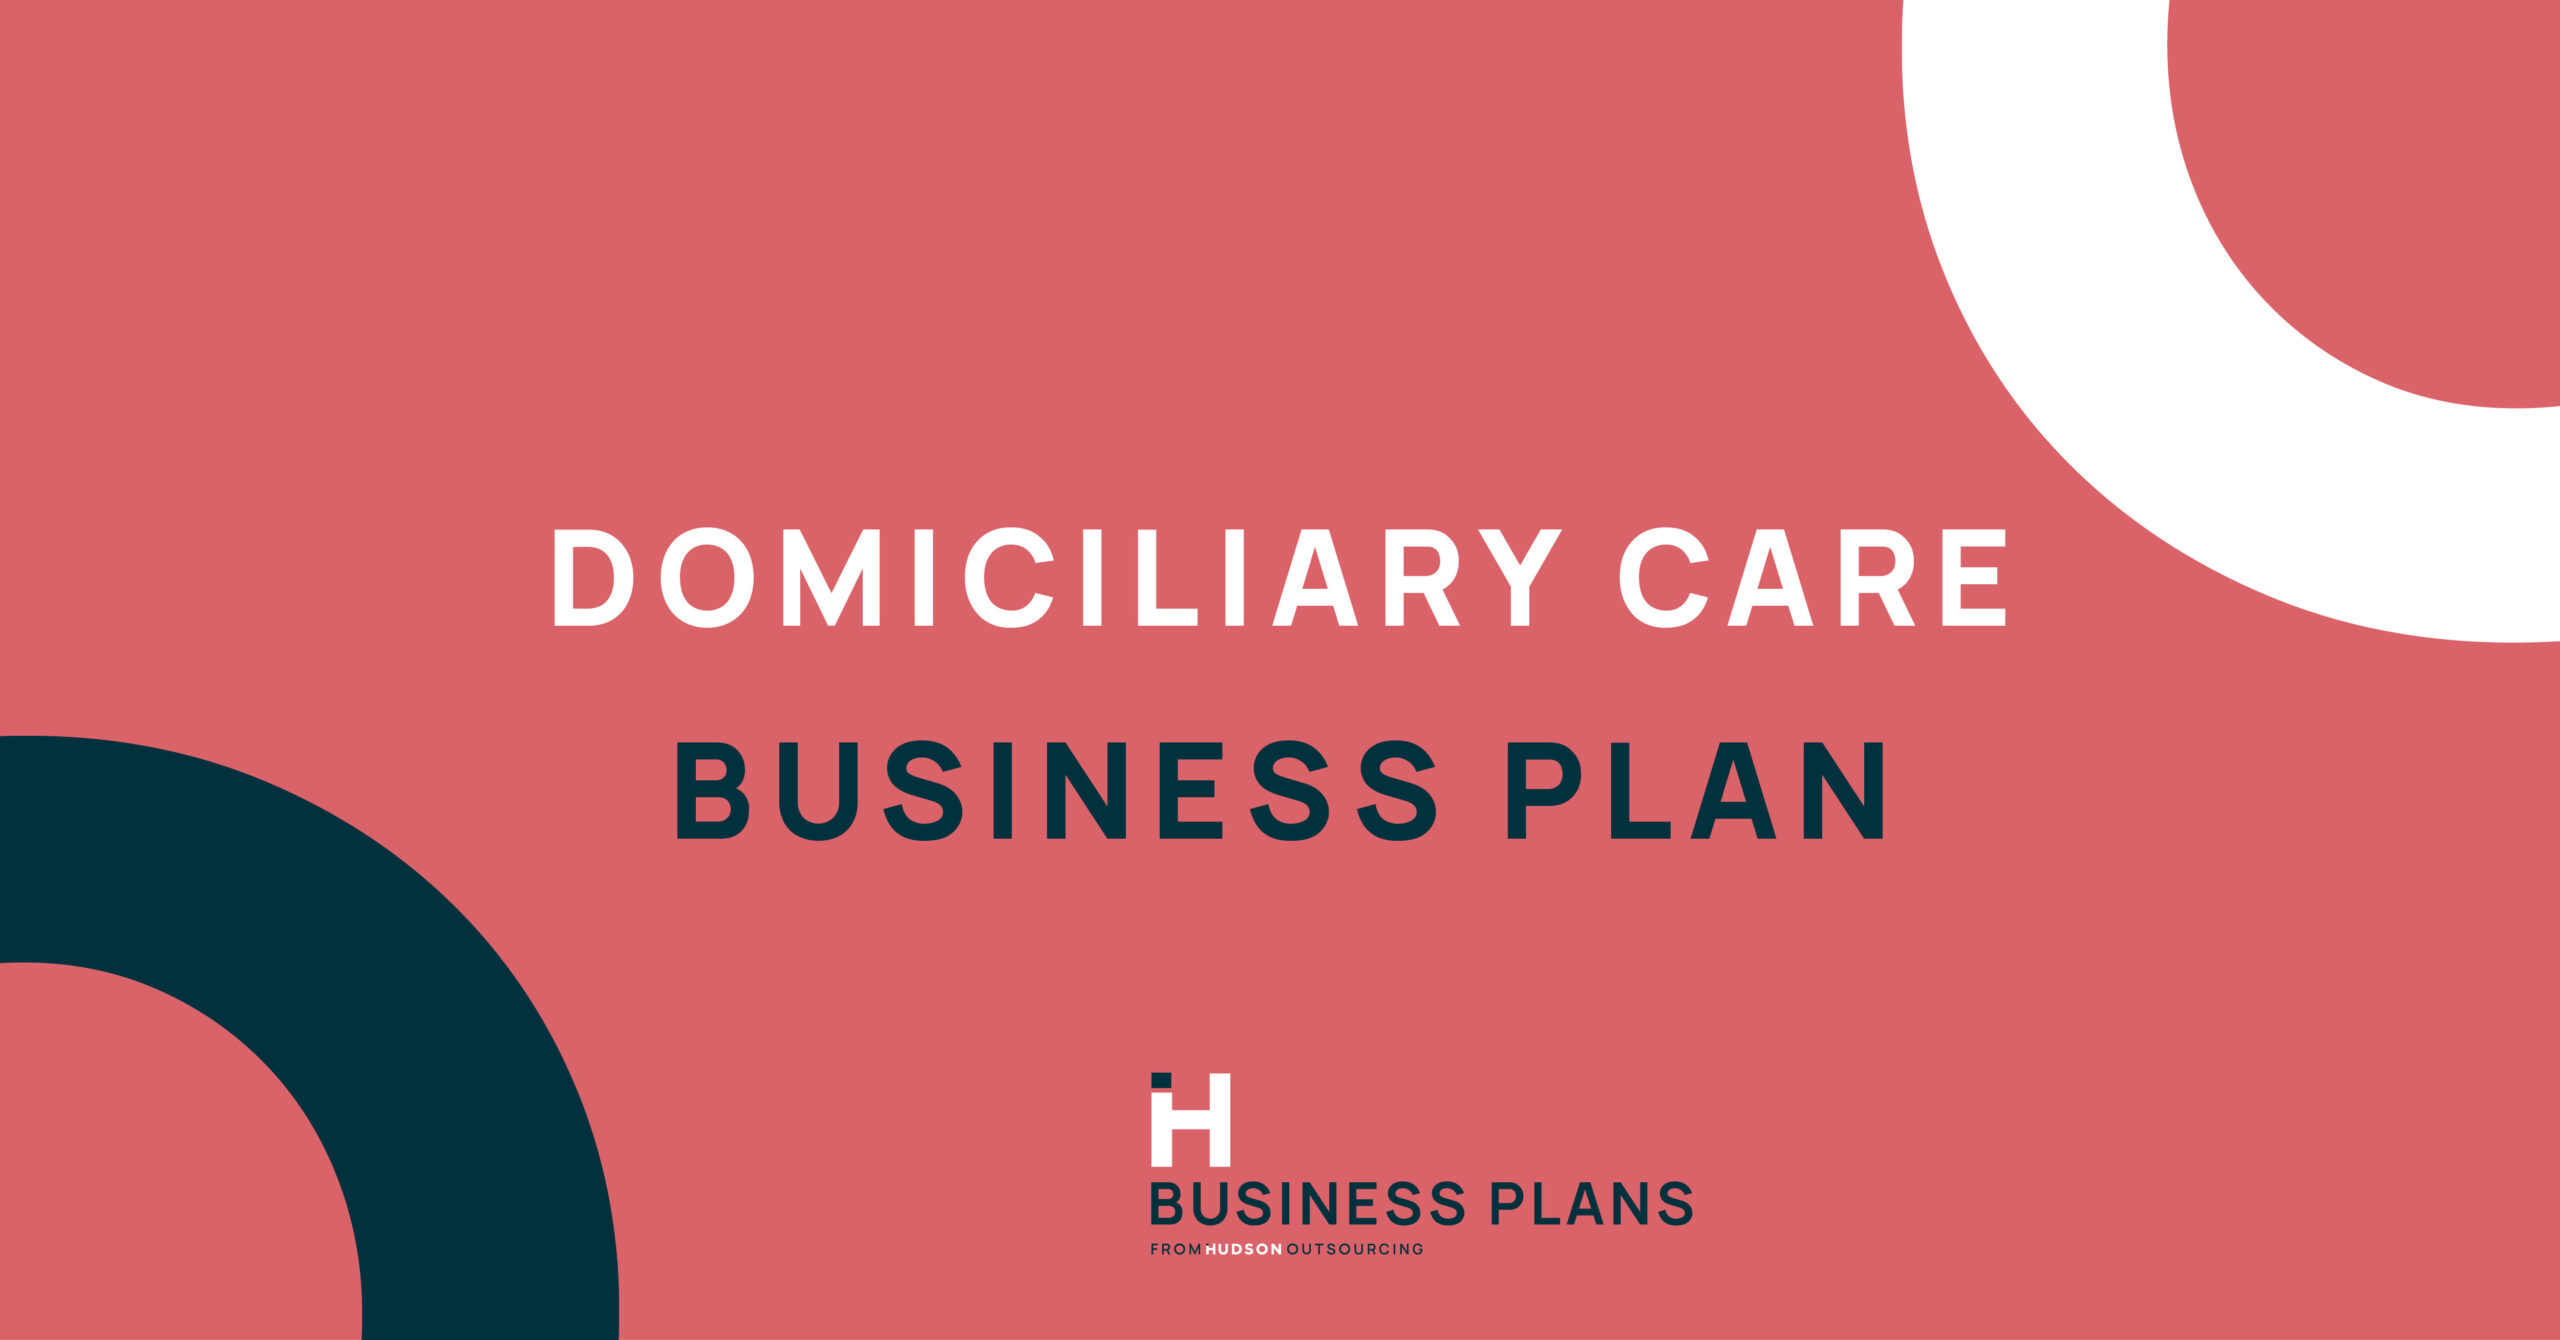 business plan for domiciliary care